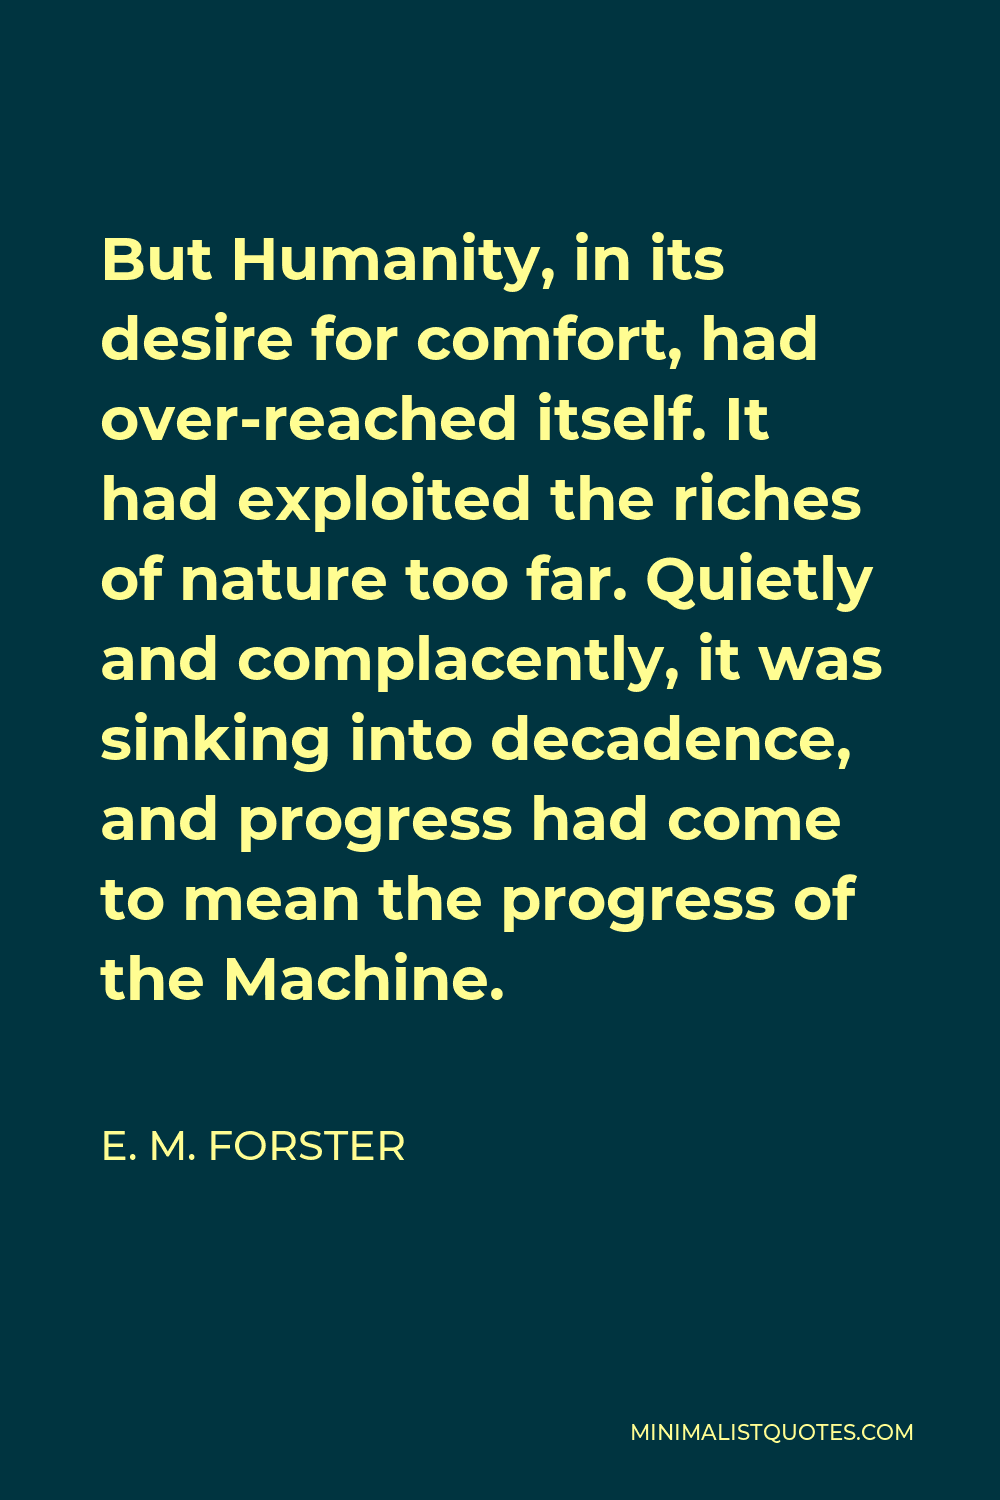 E. M. Forster Quote - But Humanity, in its desire for comfort, had over-reached itself. It had exploited the riches of nature too far. Quietly and complacently, it was sinking into decadence, and progress had come to mean the progress of the Machine.